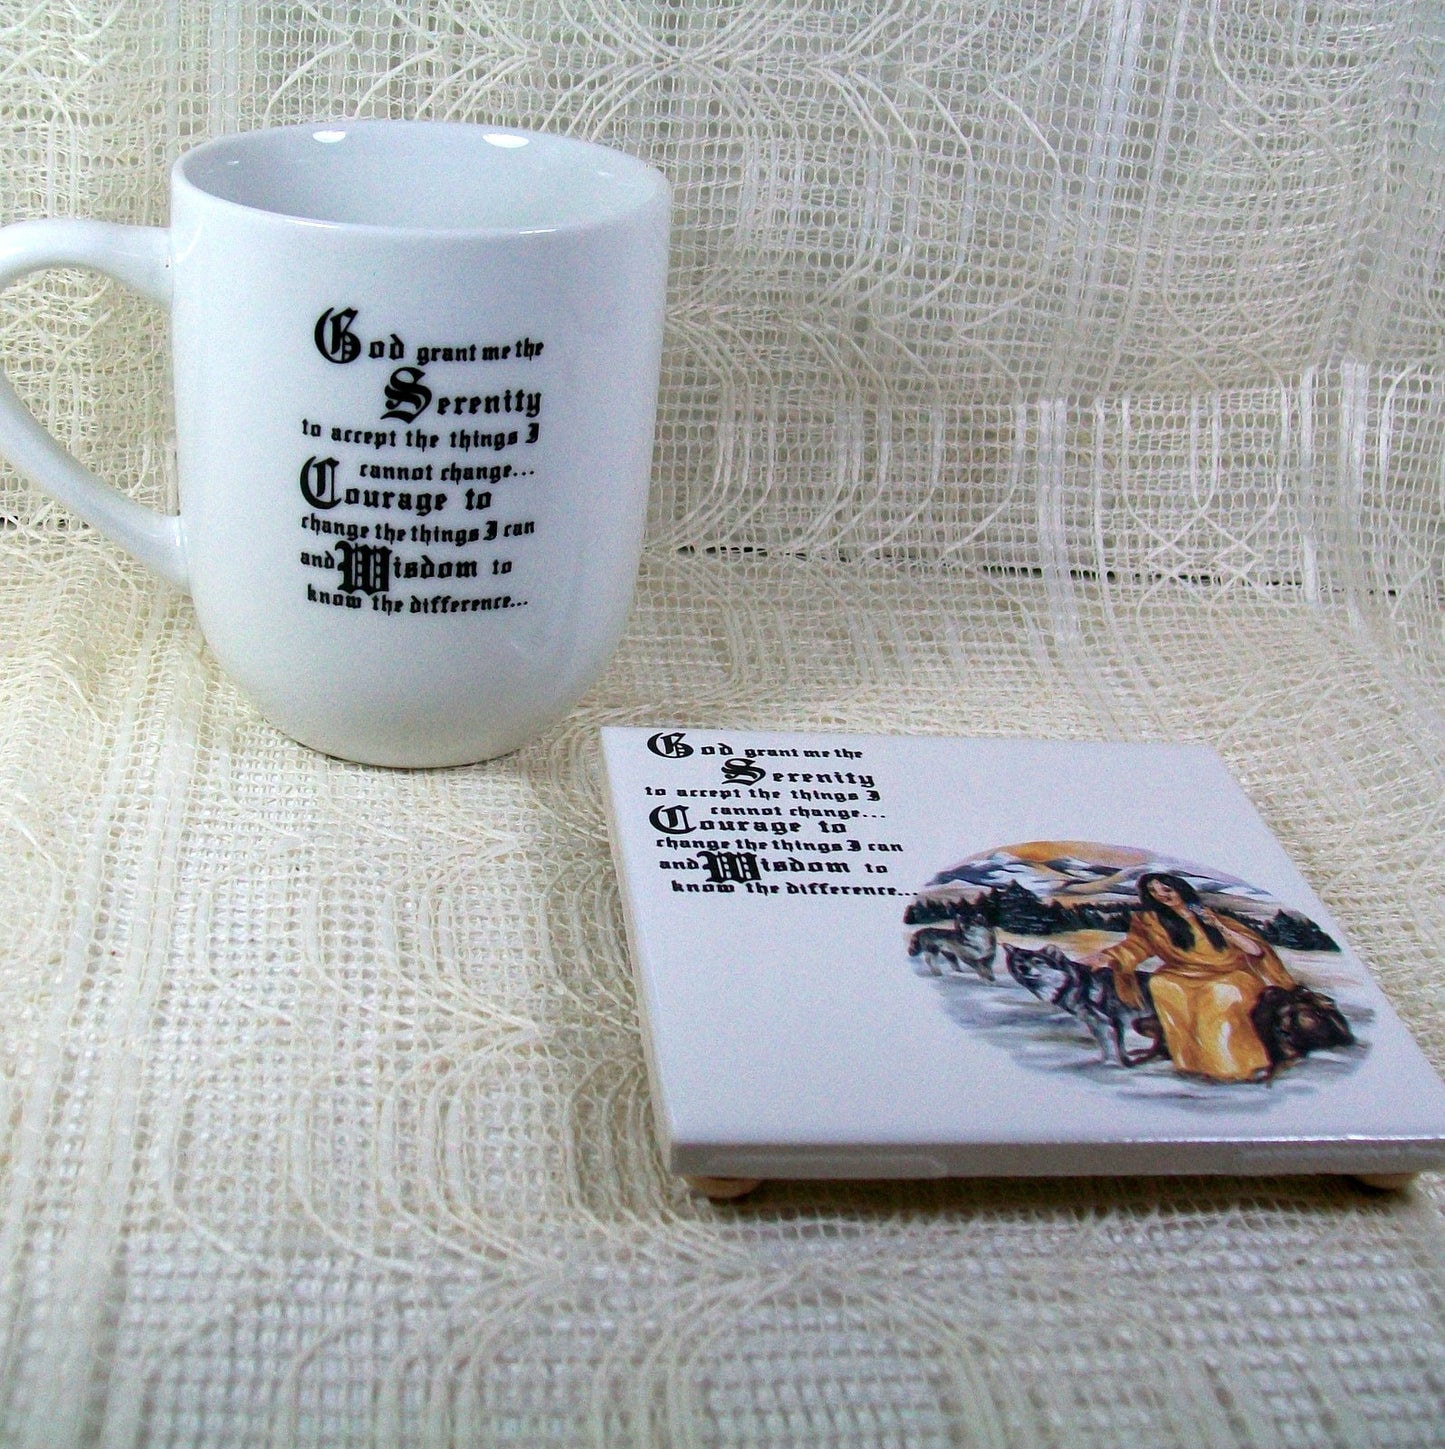 White glossy ceramic mug wtih the handle facing left.  The Serenity prayer is showing on this side of the mug.  The tile coaster is next to the mug with the native American girl and the serentiy prayer.